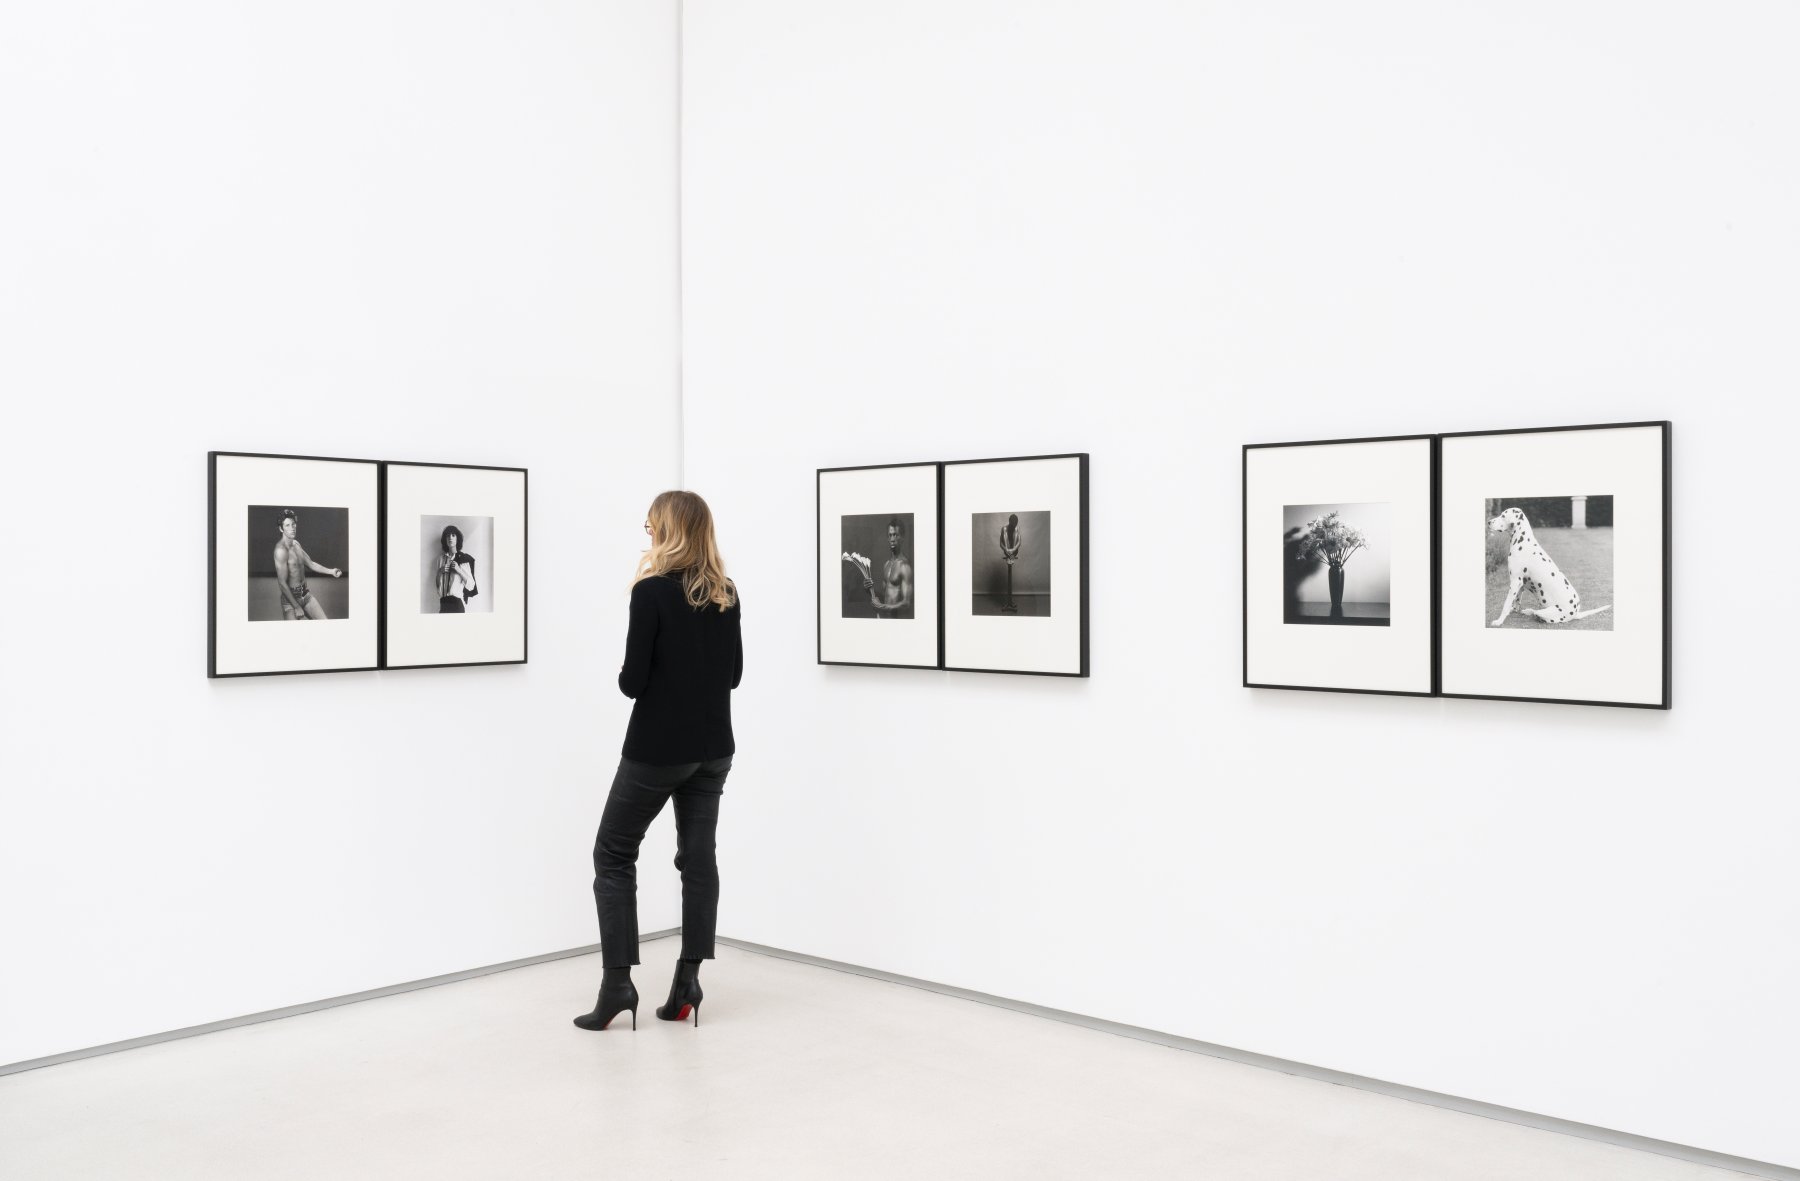 Installation image for Robert Mapplethorpe curated by Edward Enninful, at Thaddaeus Ropac